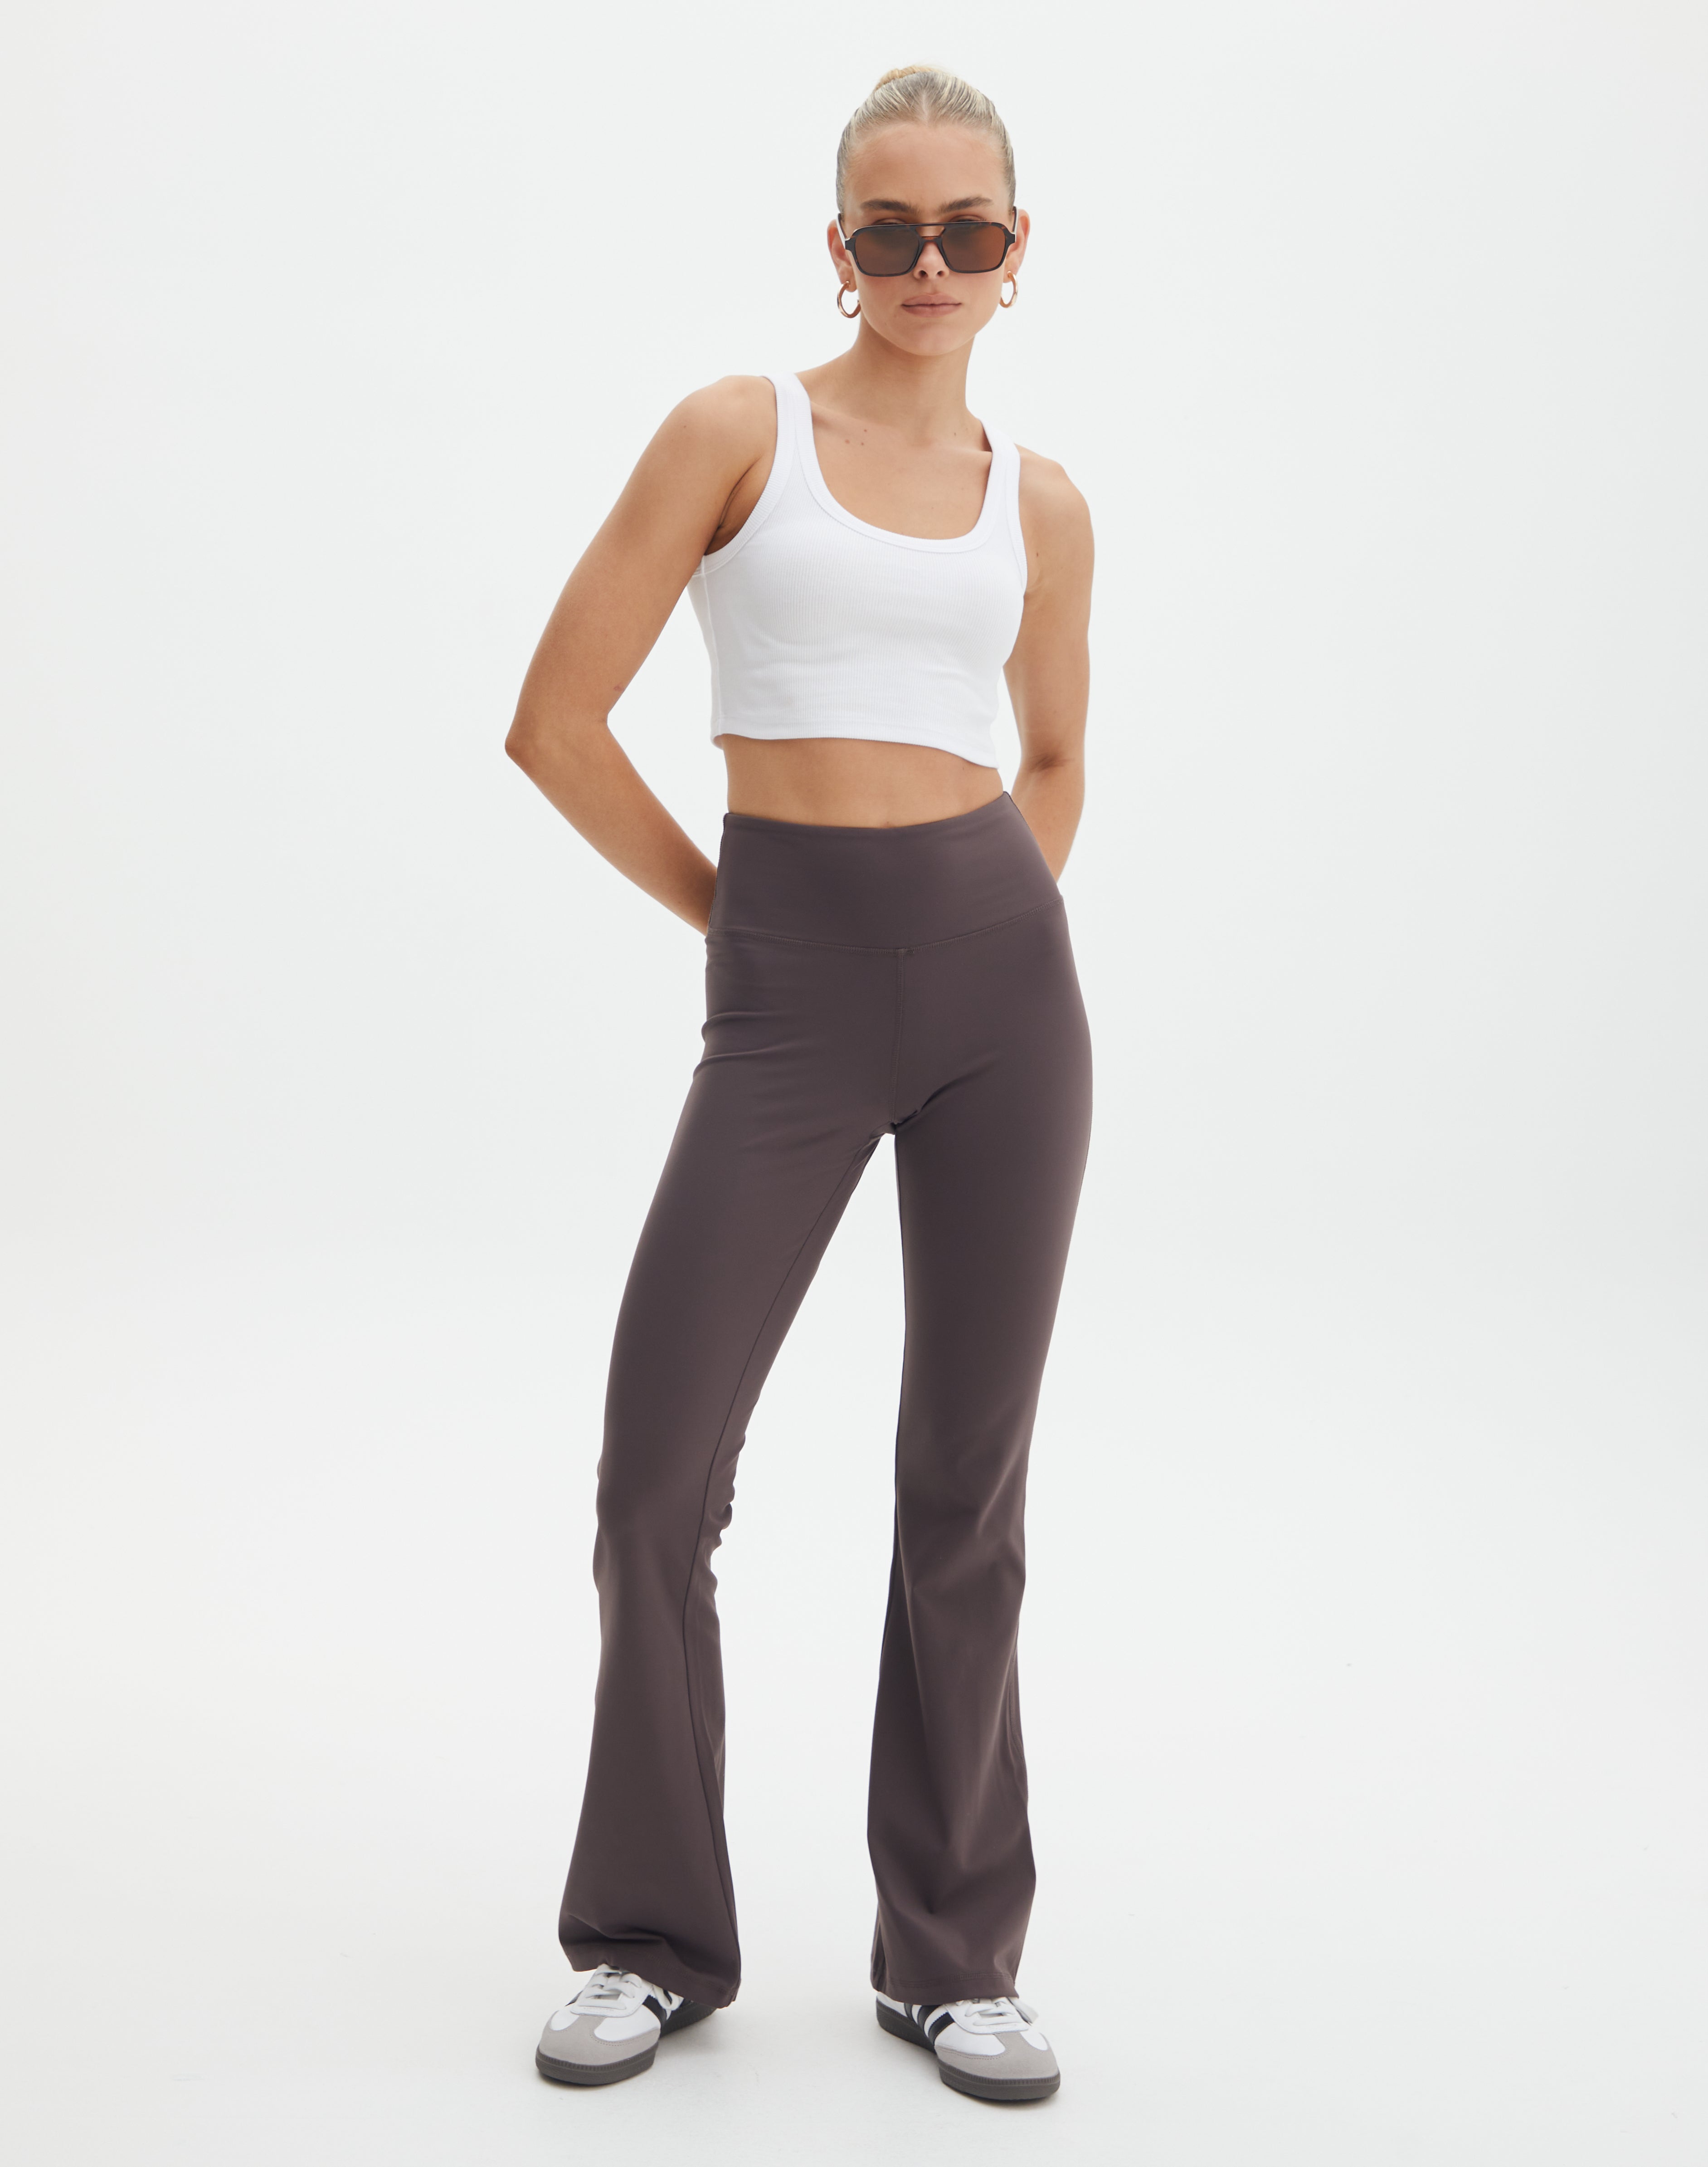 Form Fit Flare Yoga Pant in Its Soy Cute